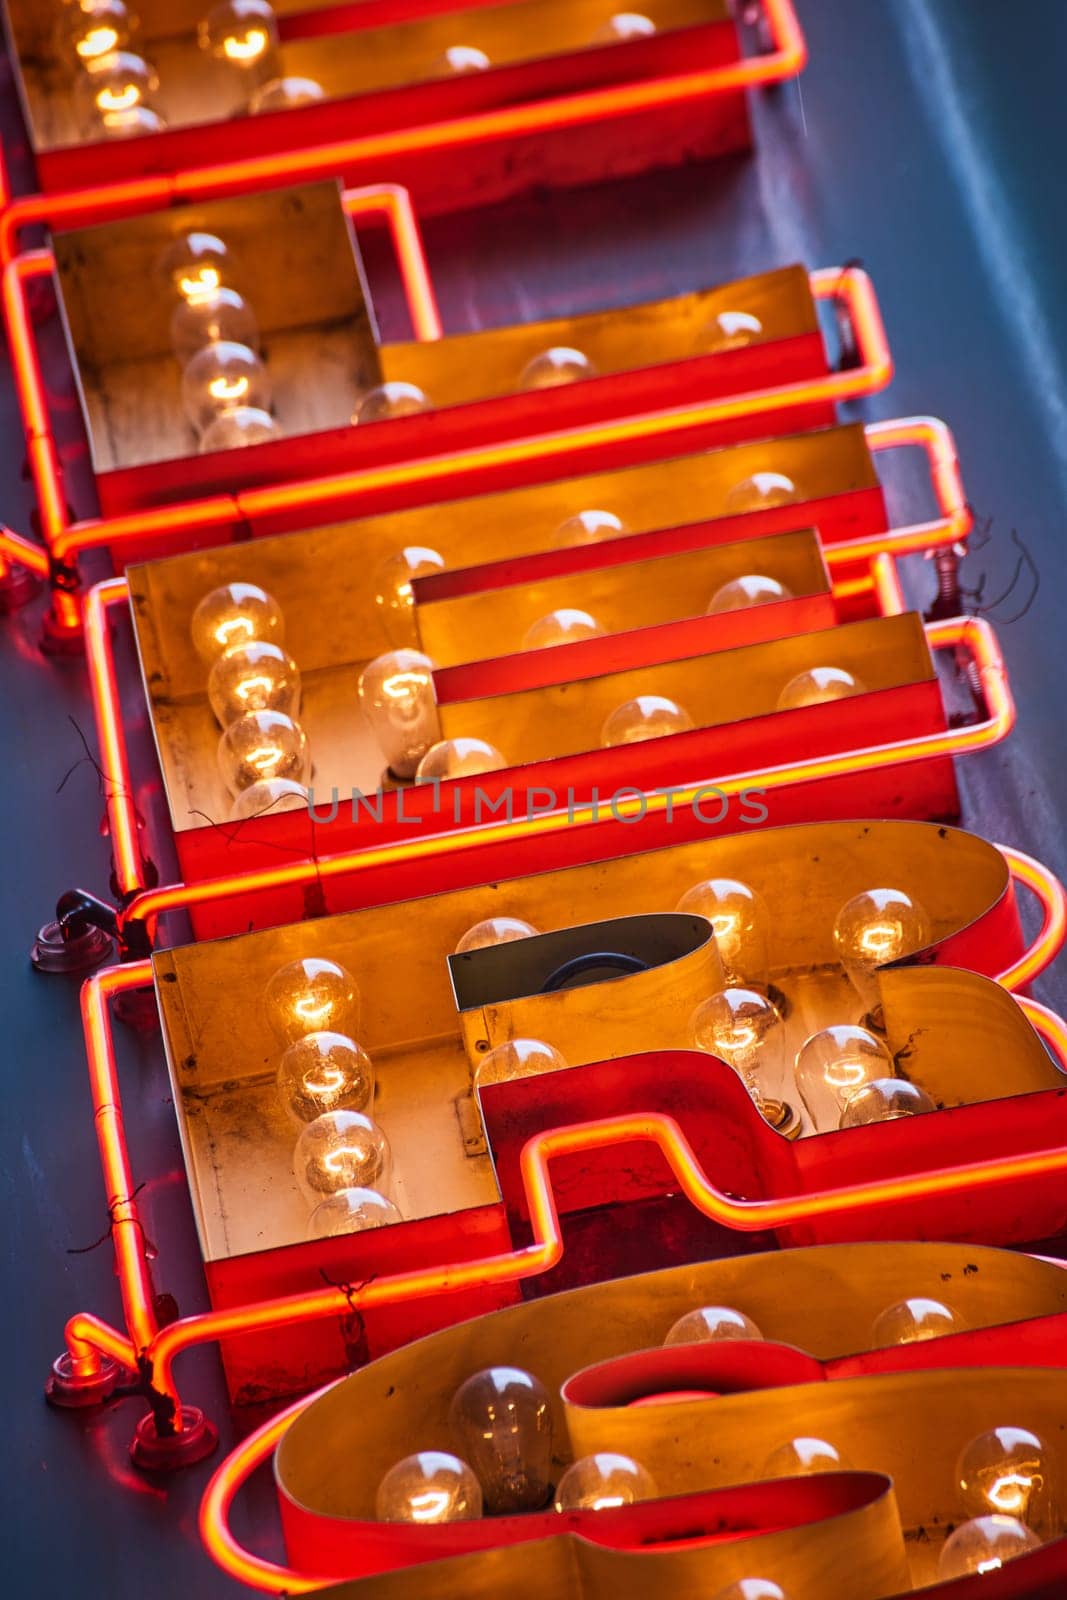 Letters of sign close up in abstract view of antique, yellow lightbulb sign with orange tube lights by njproductions